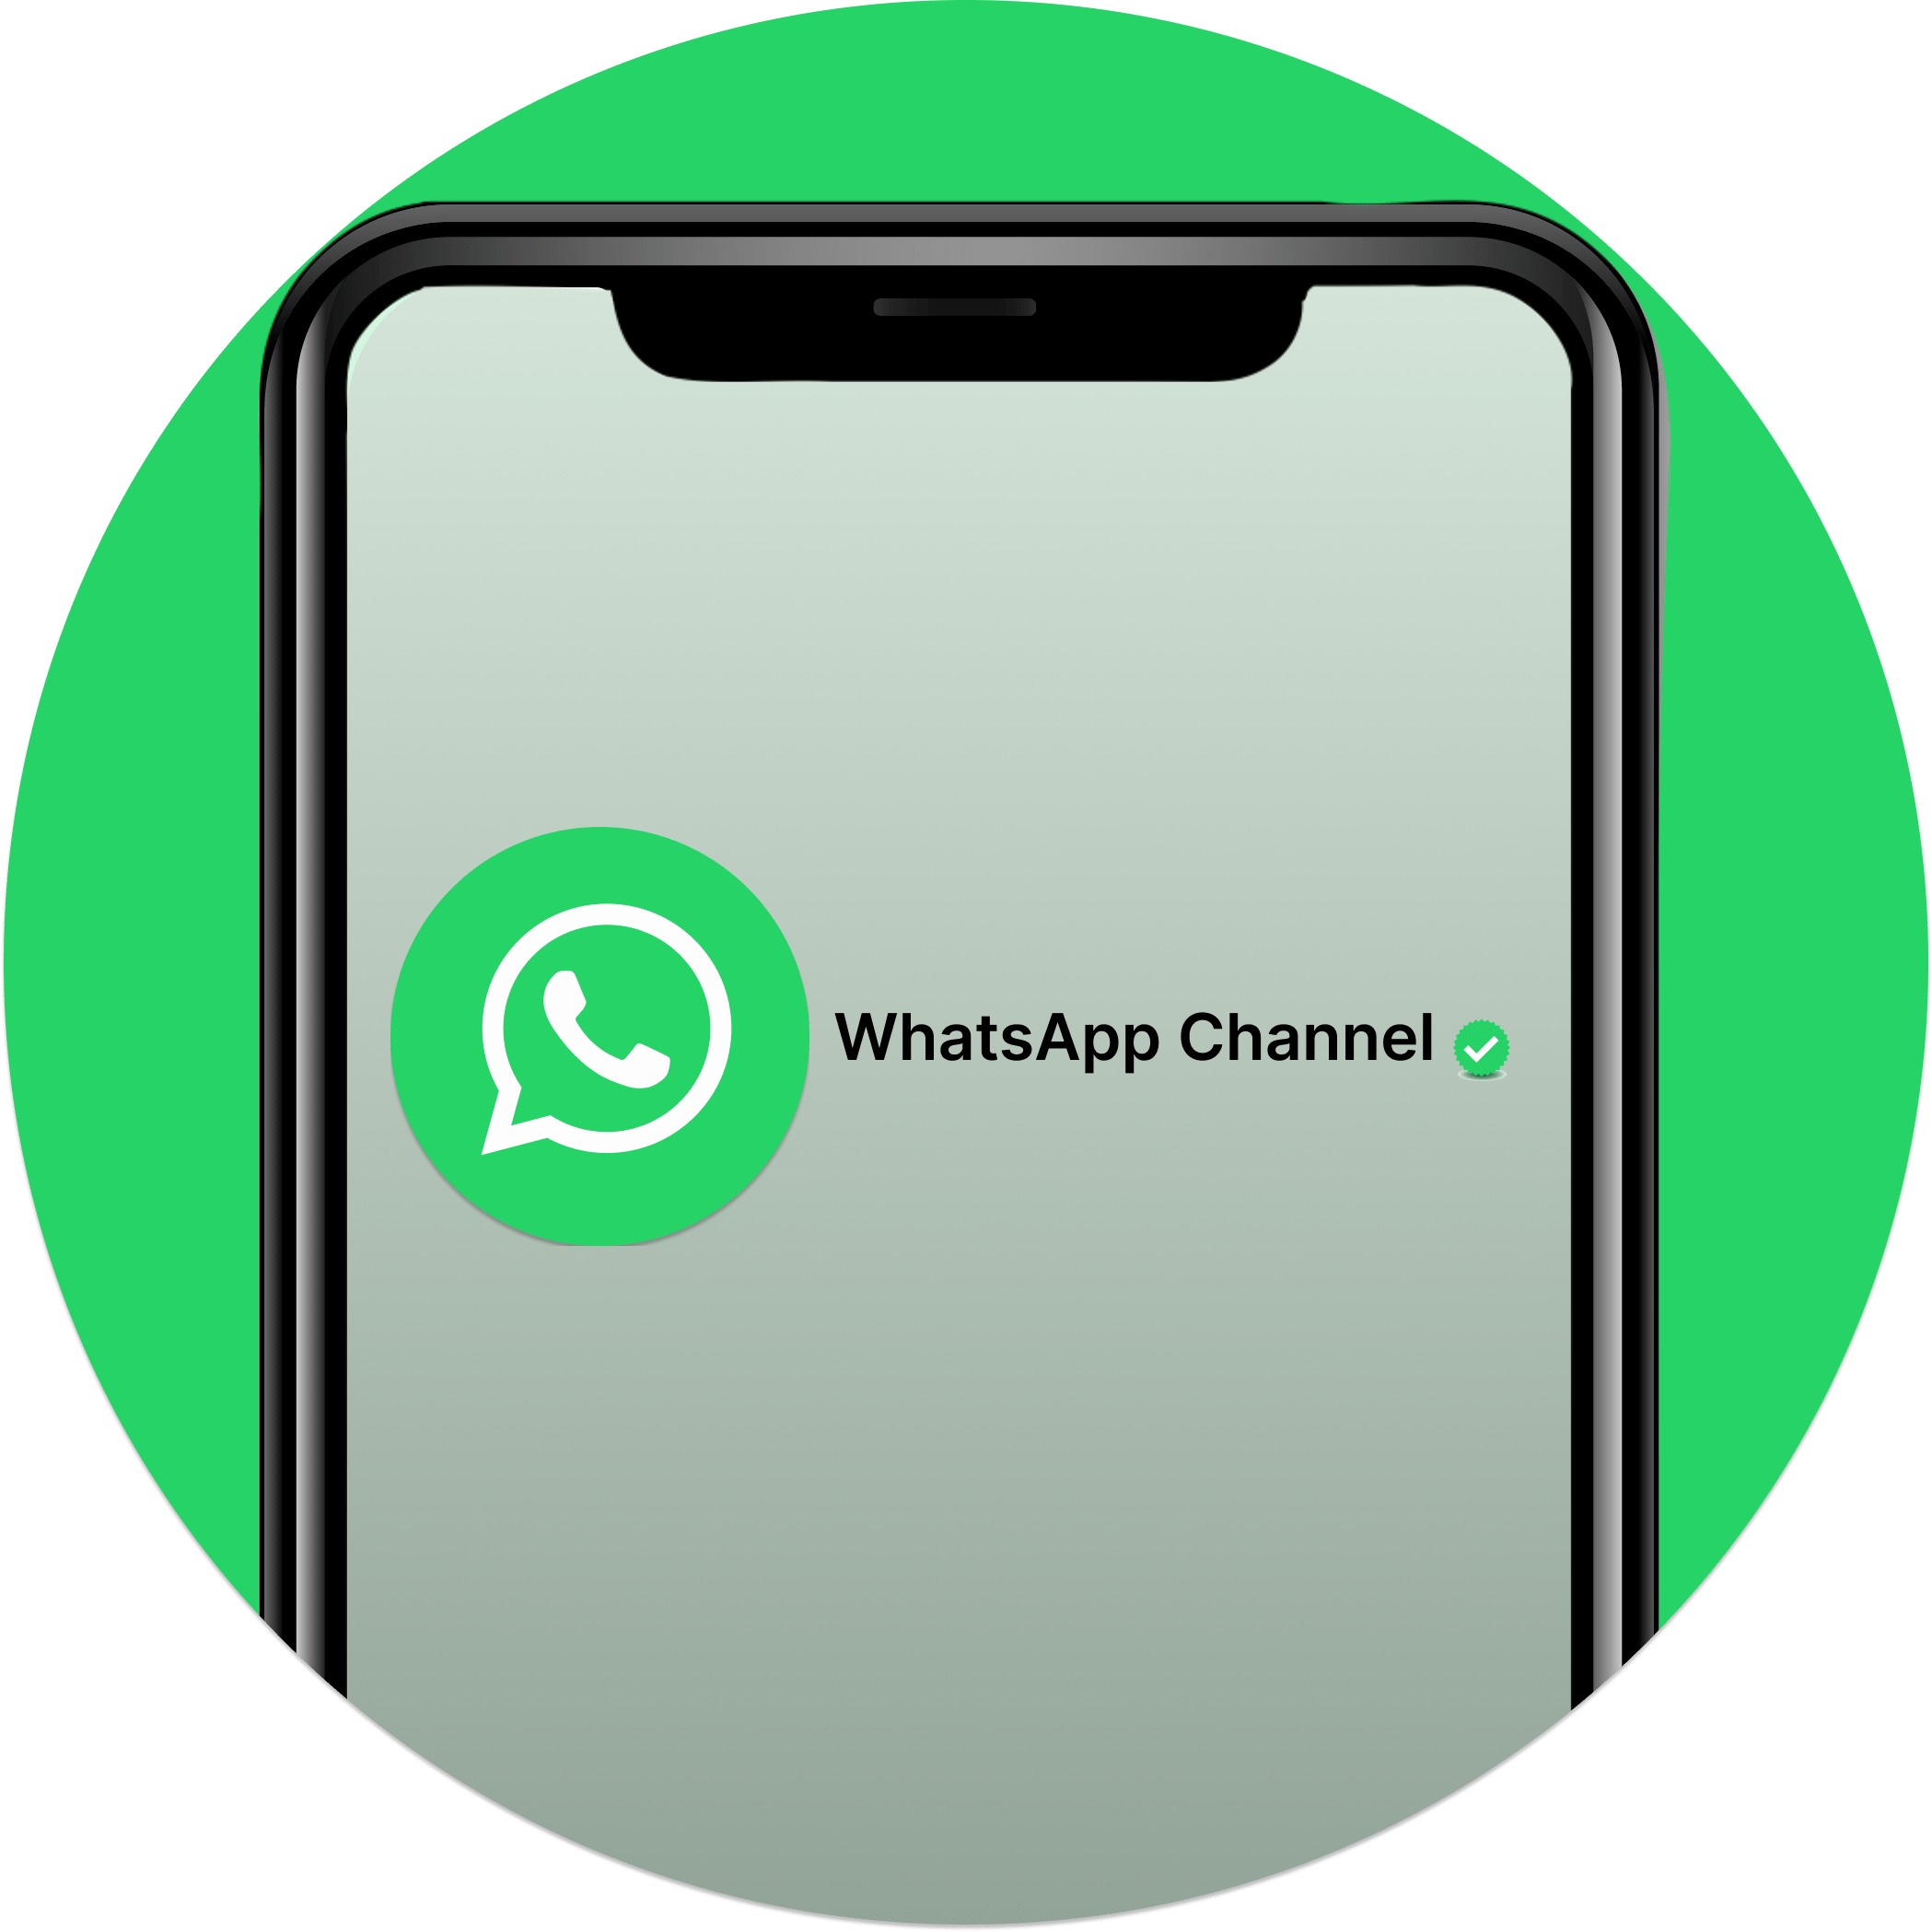 WhatsApp Channel Launched 